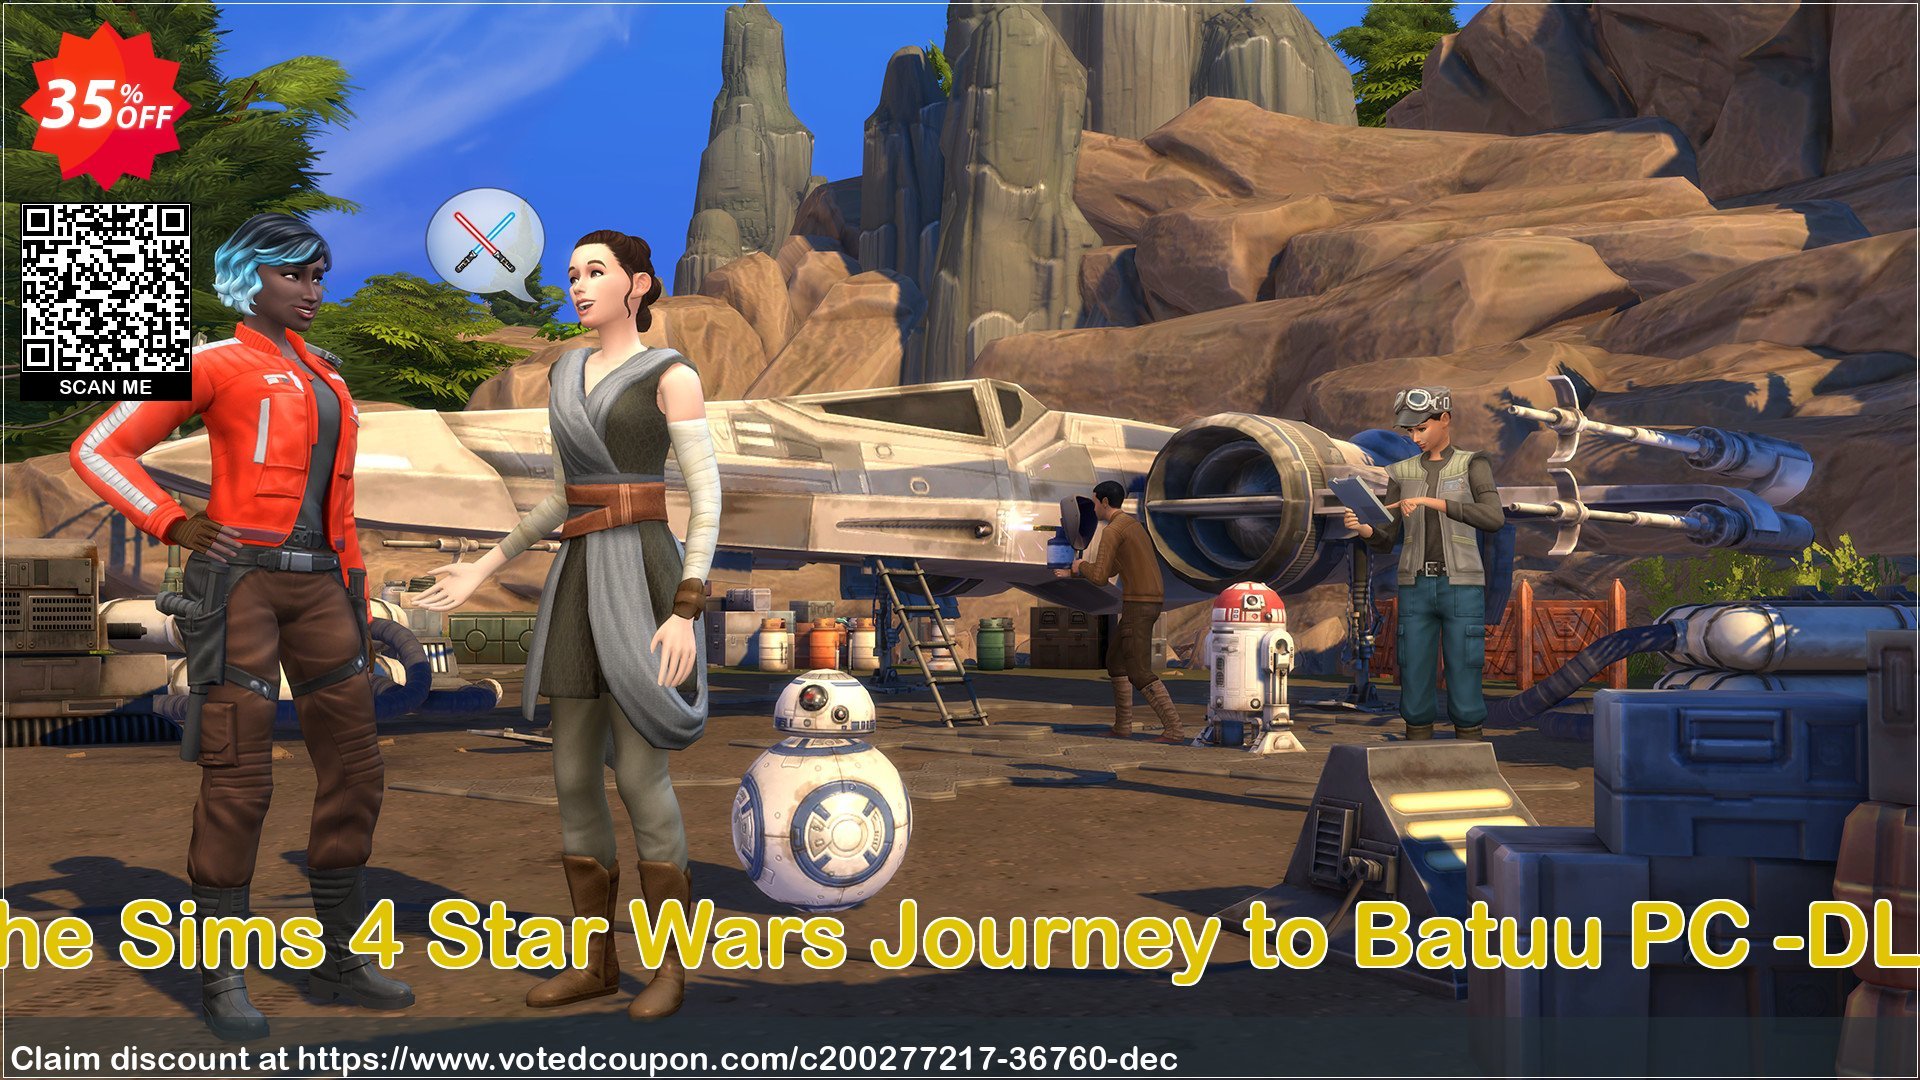 The Sims 4 Star Wars Journey to Batuu PC -DLC Coupon Code May 2024, 35% OFF - VotedCoupon